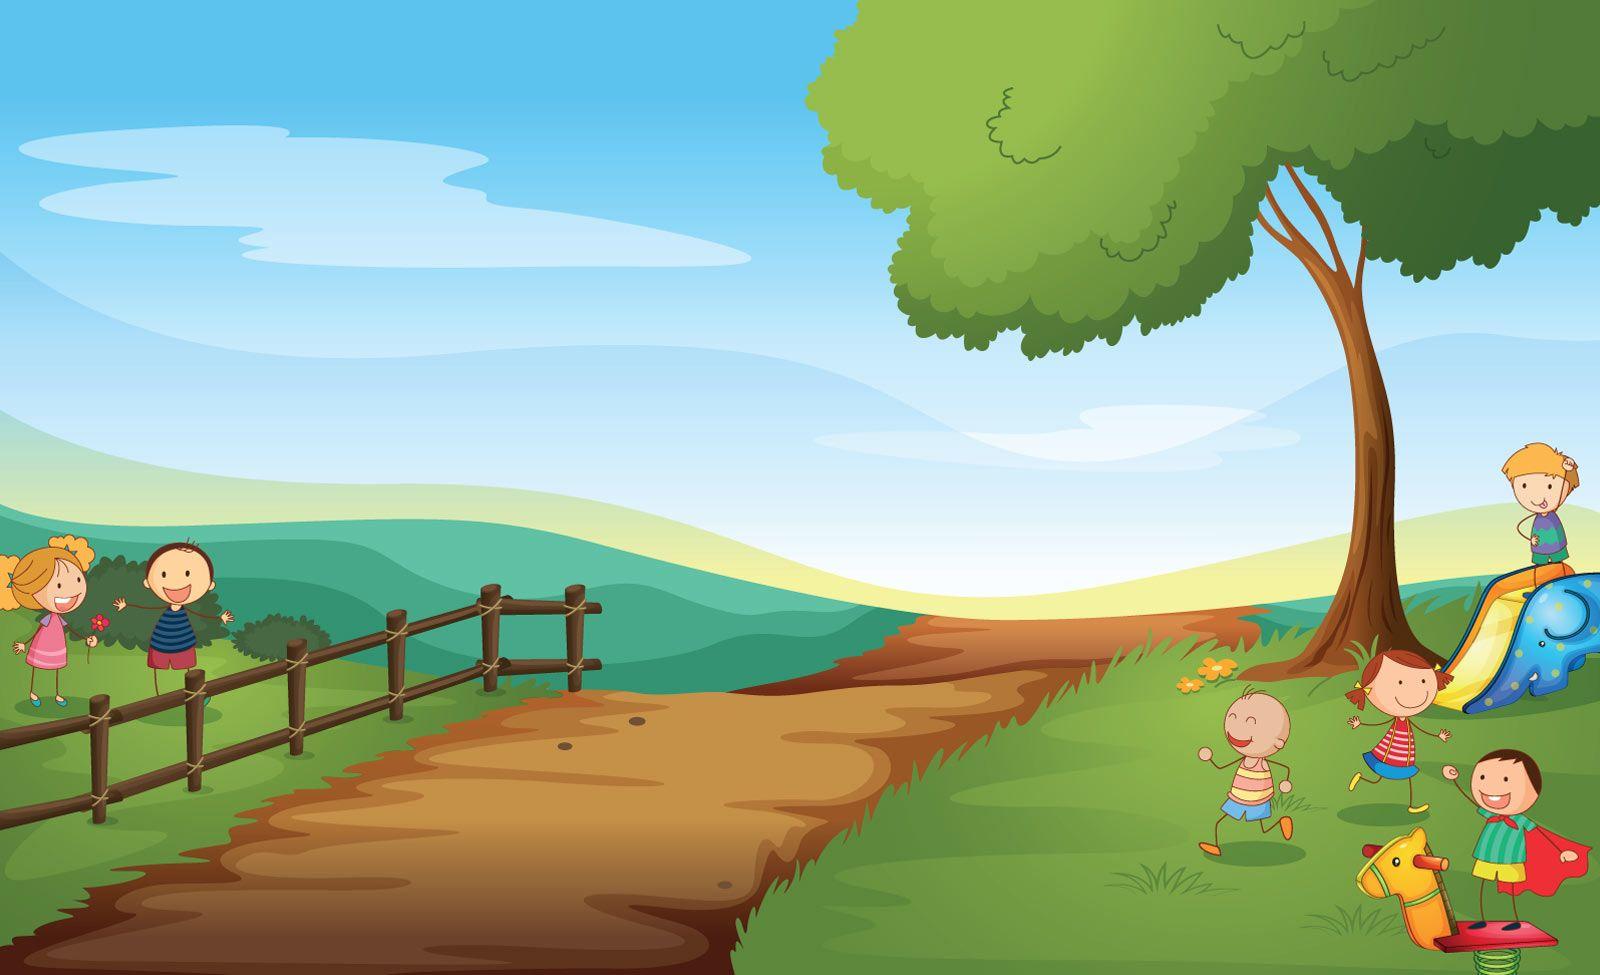 background image for kids 11. Background Check All